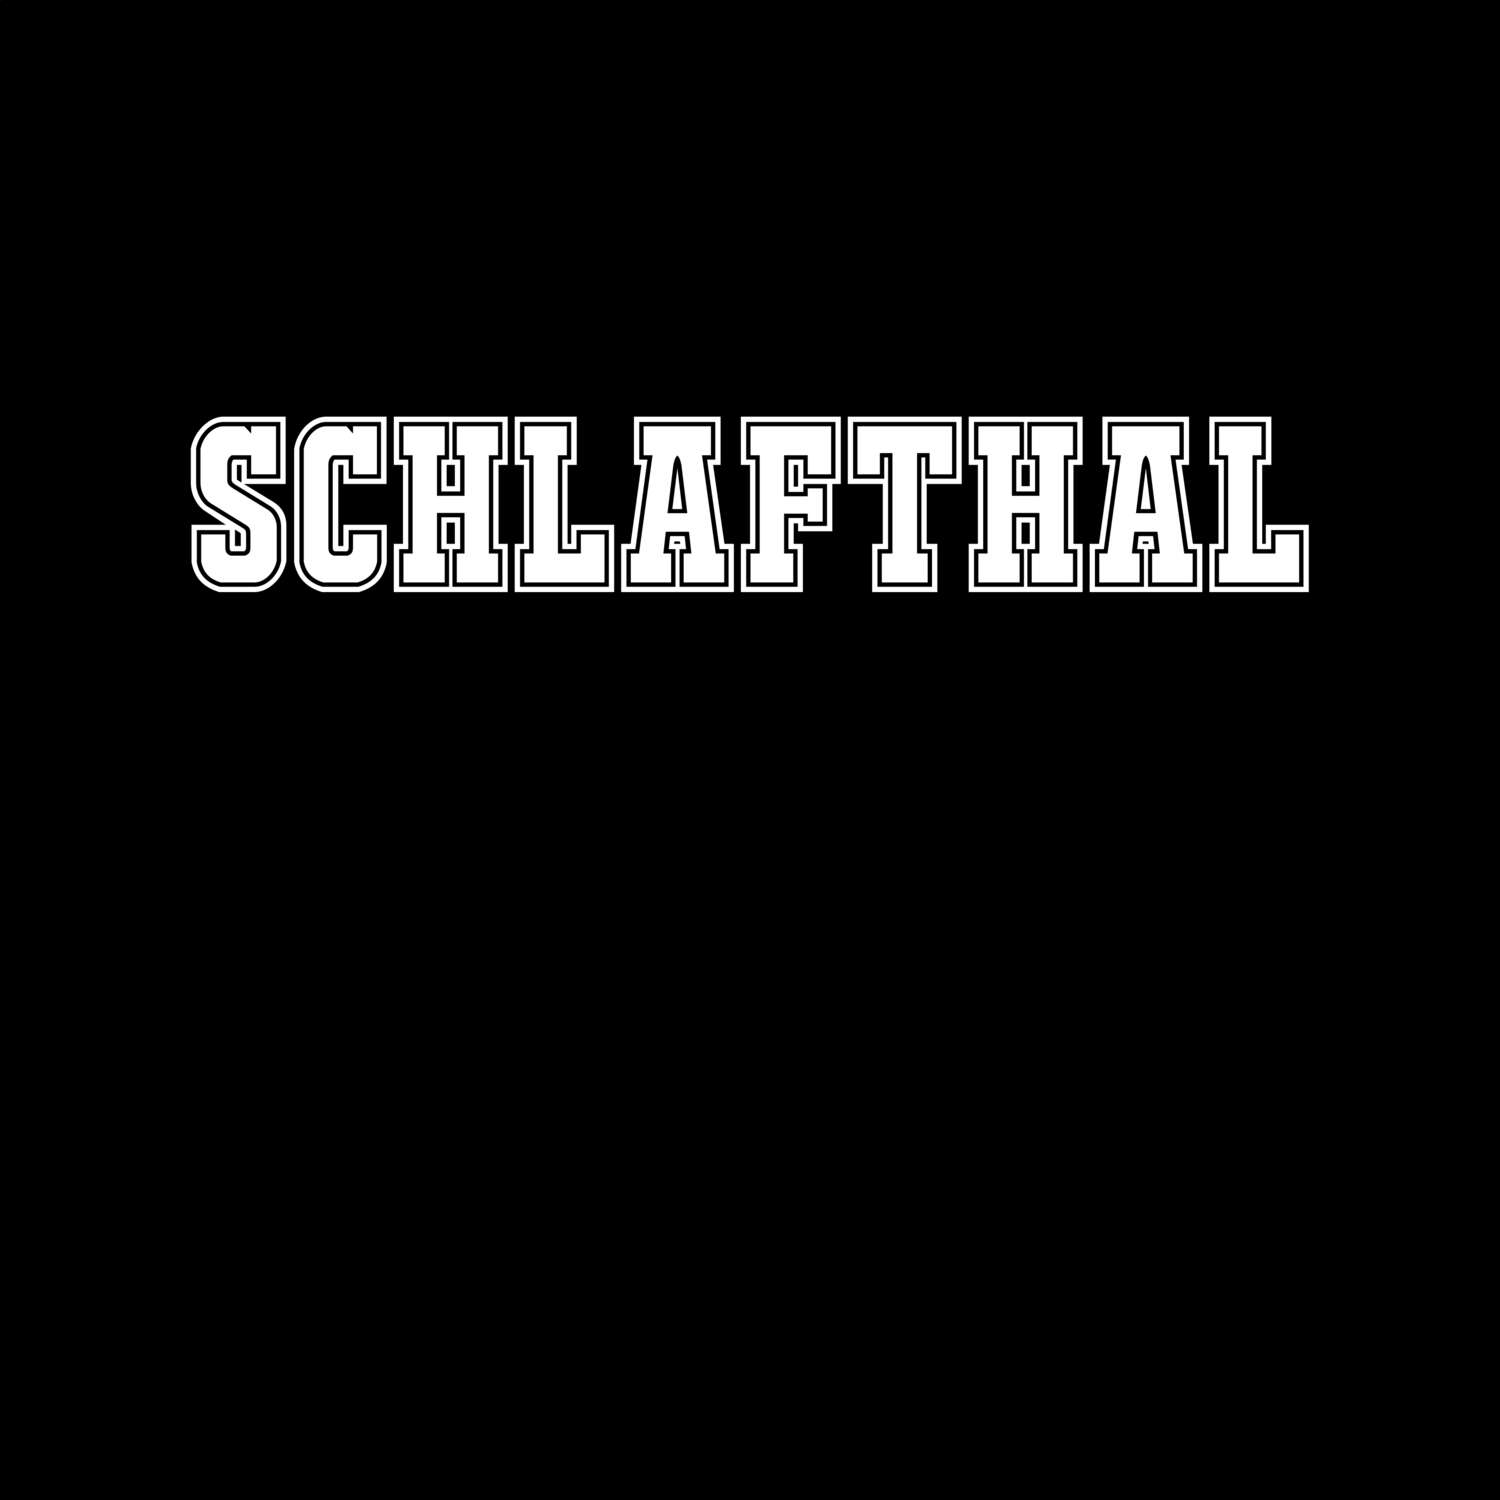 Schlafthal T-Shirt »Classic«